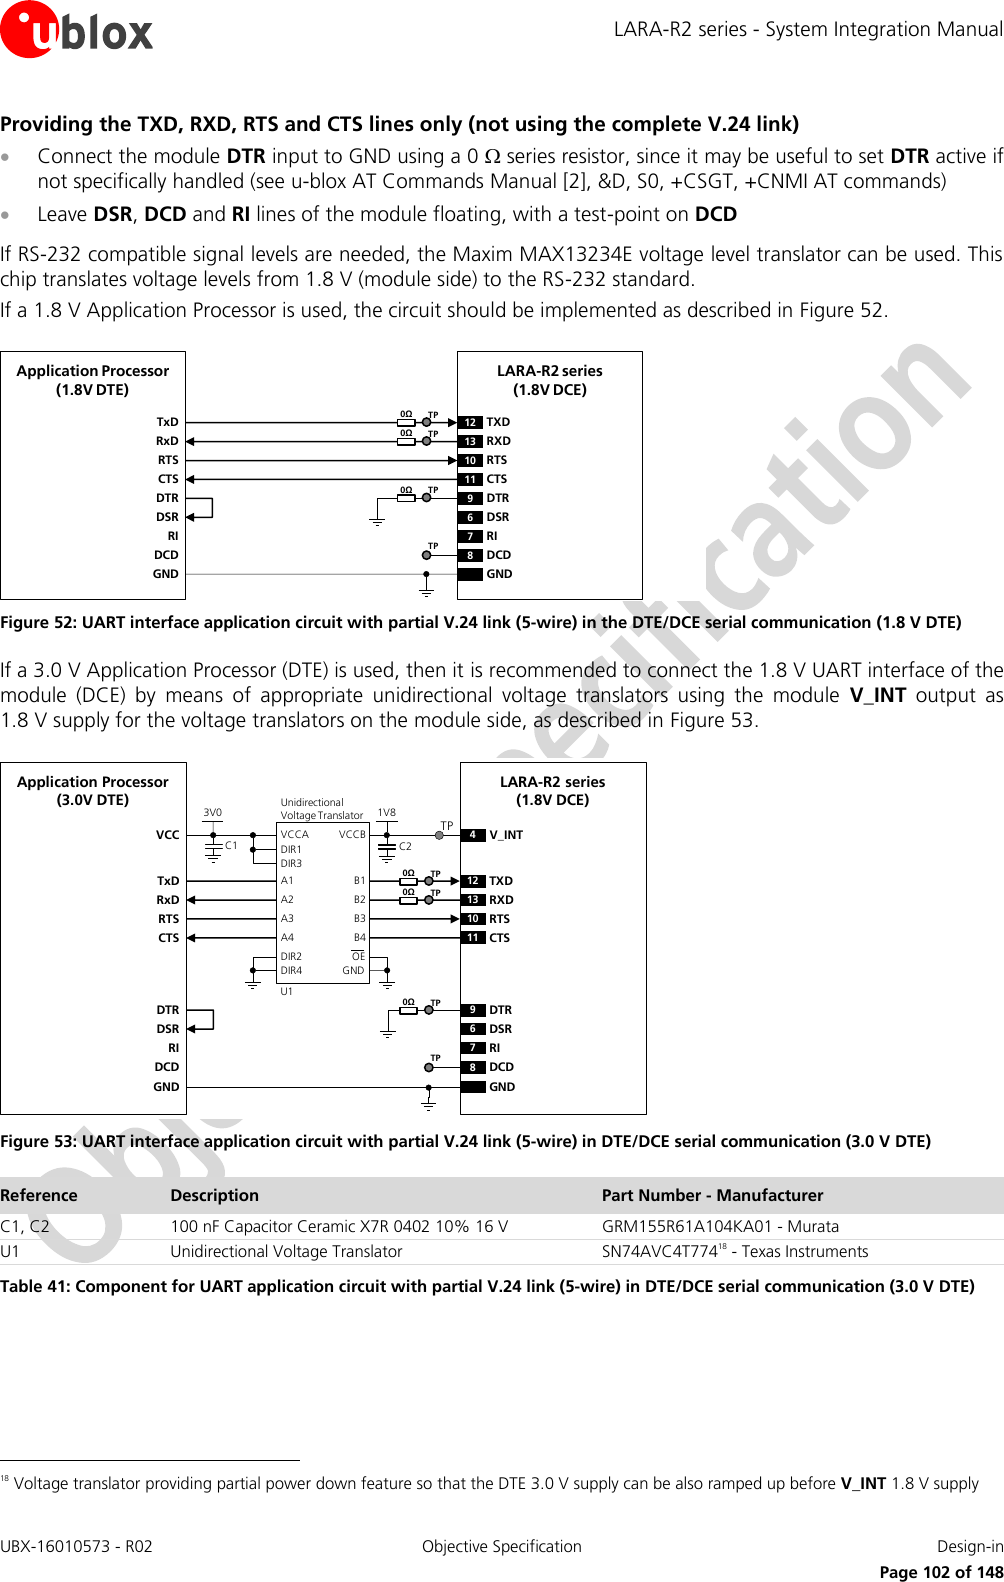 LARA-R2 series - System Integration Manual UBX-16010573 - R02  Objective Specification  Design-in     Page 102 of 148 Providing the TXD, RXD, RTS and CTS lines only (not using the complete V.24 link)  Connect the module DTR input to GND using a 0  series resistor, since it may be useful to set DTR active if not specifically handled (see u-blox AT Commands Manual [2], &amp;D, S0, +CSGT, +CNMI AT commands)  Leave DSR, DCD and RI lines of the module floating, with a test-point on DCD  If RS-232 compatible signal levels are needed, the Maxim MAX13234E voltage level translator can be used. This chip translates voltage levels from 1.8 V (module side) to the RS-232 standard. If a 1.8 V Application Processor is used, the circuit should be implemented as described in Figure 52. TxDApplication Processor(1.8V DTE)RxDRTSCTSDTRDSRRIDCDGNDLARA-R2 series(1.8V DCE)12 TXD9DTR13 RXD10 RTS11 CTS6DSR7RI8DCDGND0ΩTP0ΩTP0ΩTPTP Figure 52: UART interface application circuit with partial V.24 link (5-wire) in the DTE/DCE serial communication (1.8 V DTE) If a 3.0 V Application Processor (DTE) is used, then it is recommended to connect the 1.8 V UART interface of the module  (DCE)  by  means  of  appropriate  unidirectional  voltage  translators  using  the  module  V_INT  output  as 1.8 V supply for the voltage translators on the module side, as described in Figure 53. 4V_INTTxDApplication Processor(3.0V DTE)RxDRTSCTSDTRDSRRIDCDGNDLARA-R2 series(1.8V DCE)12 TXD9DTR13 RXD10 RTS11 CTS6DSR7RI8DCDGND1V8B1 A1GNDU1B3A3VCCBVCCAUnidirectionalVoltage TranslatorC1 C23V0DIR3DIR2 OEDIR1VCCB2 A2B4A4DIR4TP0ΩTP0ΩTP0ΩTPTP Figure 53: UART interface application circuit with partial V.24 link (5-wire) in DTE/DCE serial communication (3.0 V DTE) Reference Description Part Number - Manufacturer C1, C2 100 nF Capacitor Ceramic X7R 0402 10% 16 V GRM155R61A104KA01 - Murata U1 Unidirectional Voltage Translator SN74AVC4T77418 - Texas Instruments Table 41: Component for UART application circuit with partial V.24 link (5-wire) in DTE/DCE serial communication (3.0 V DTE)                                                        18 Voltage translator providing partial power down feature so that the DTE 3.0 V supply can be also ramped up before V_INT 1.8 V supply 